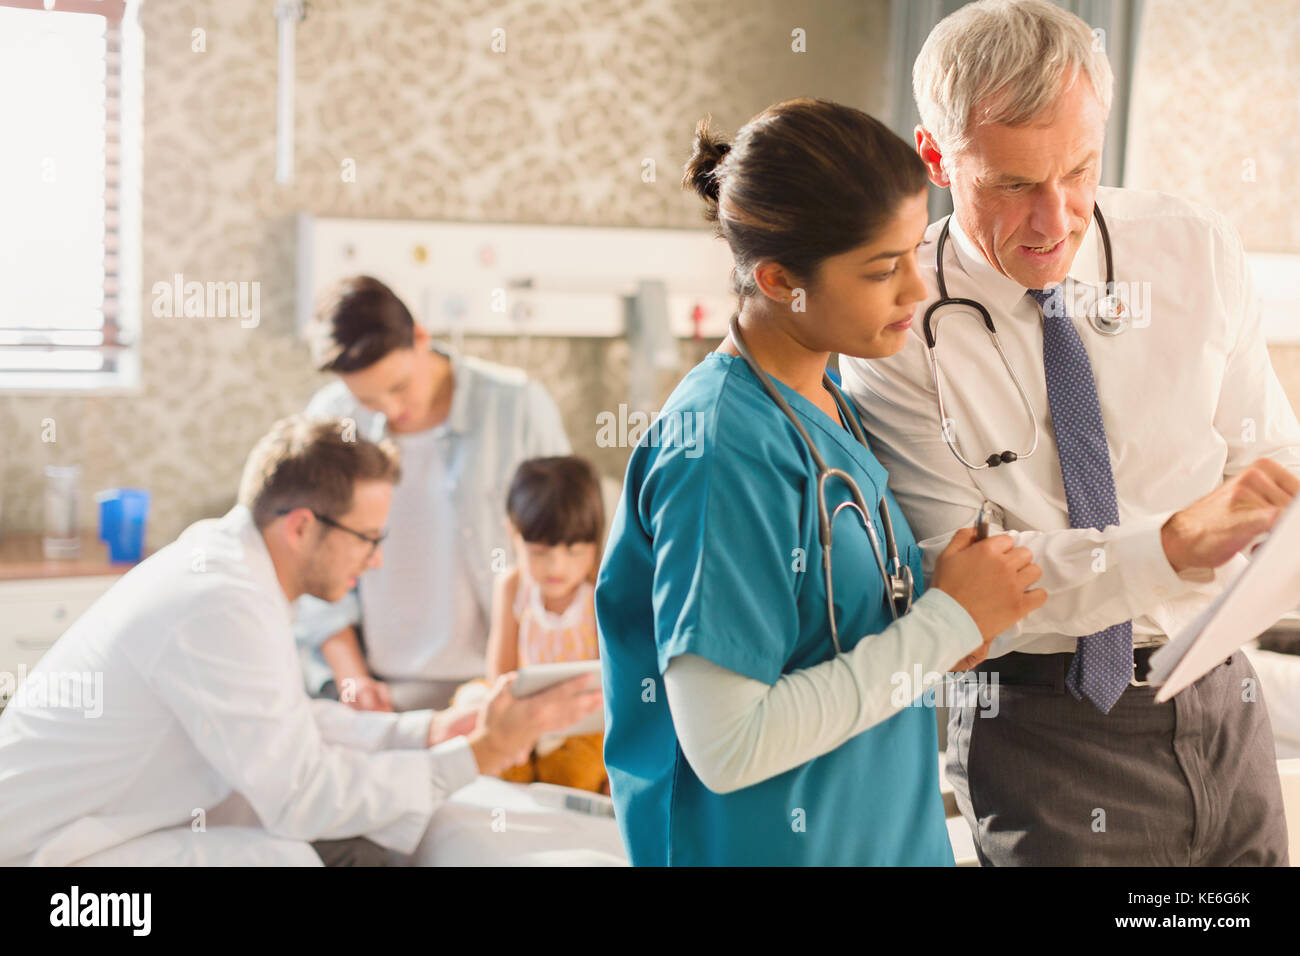 Male doctor and female nurse making rounds, reviewing medical record in hospital room Stock Photo